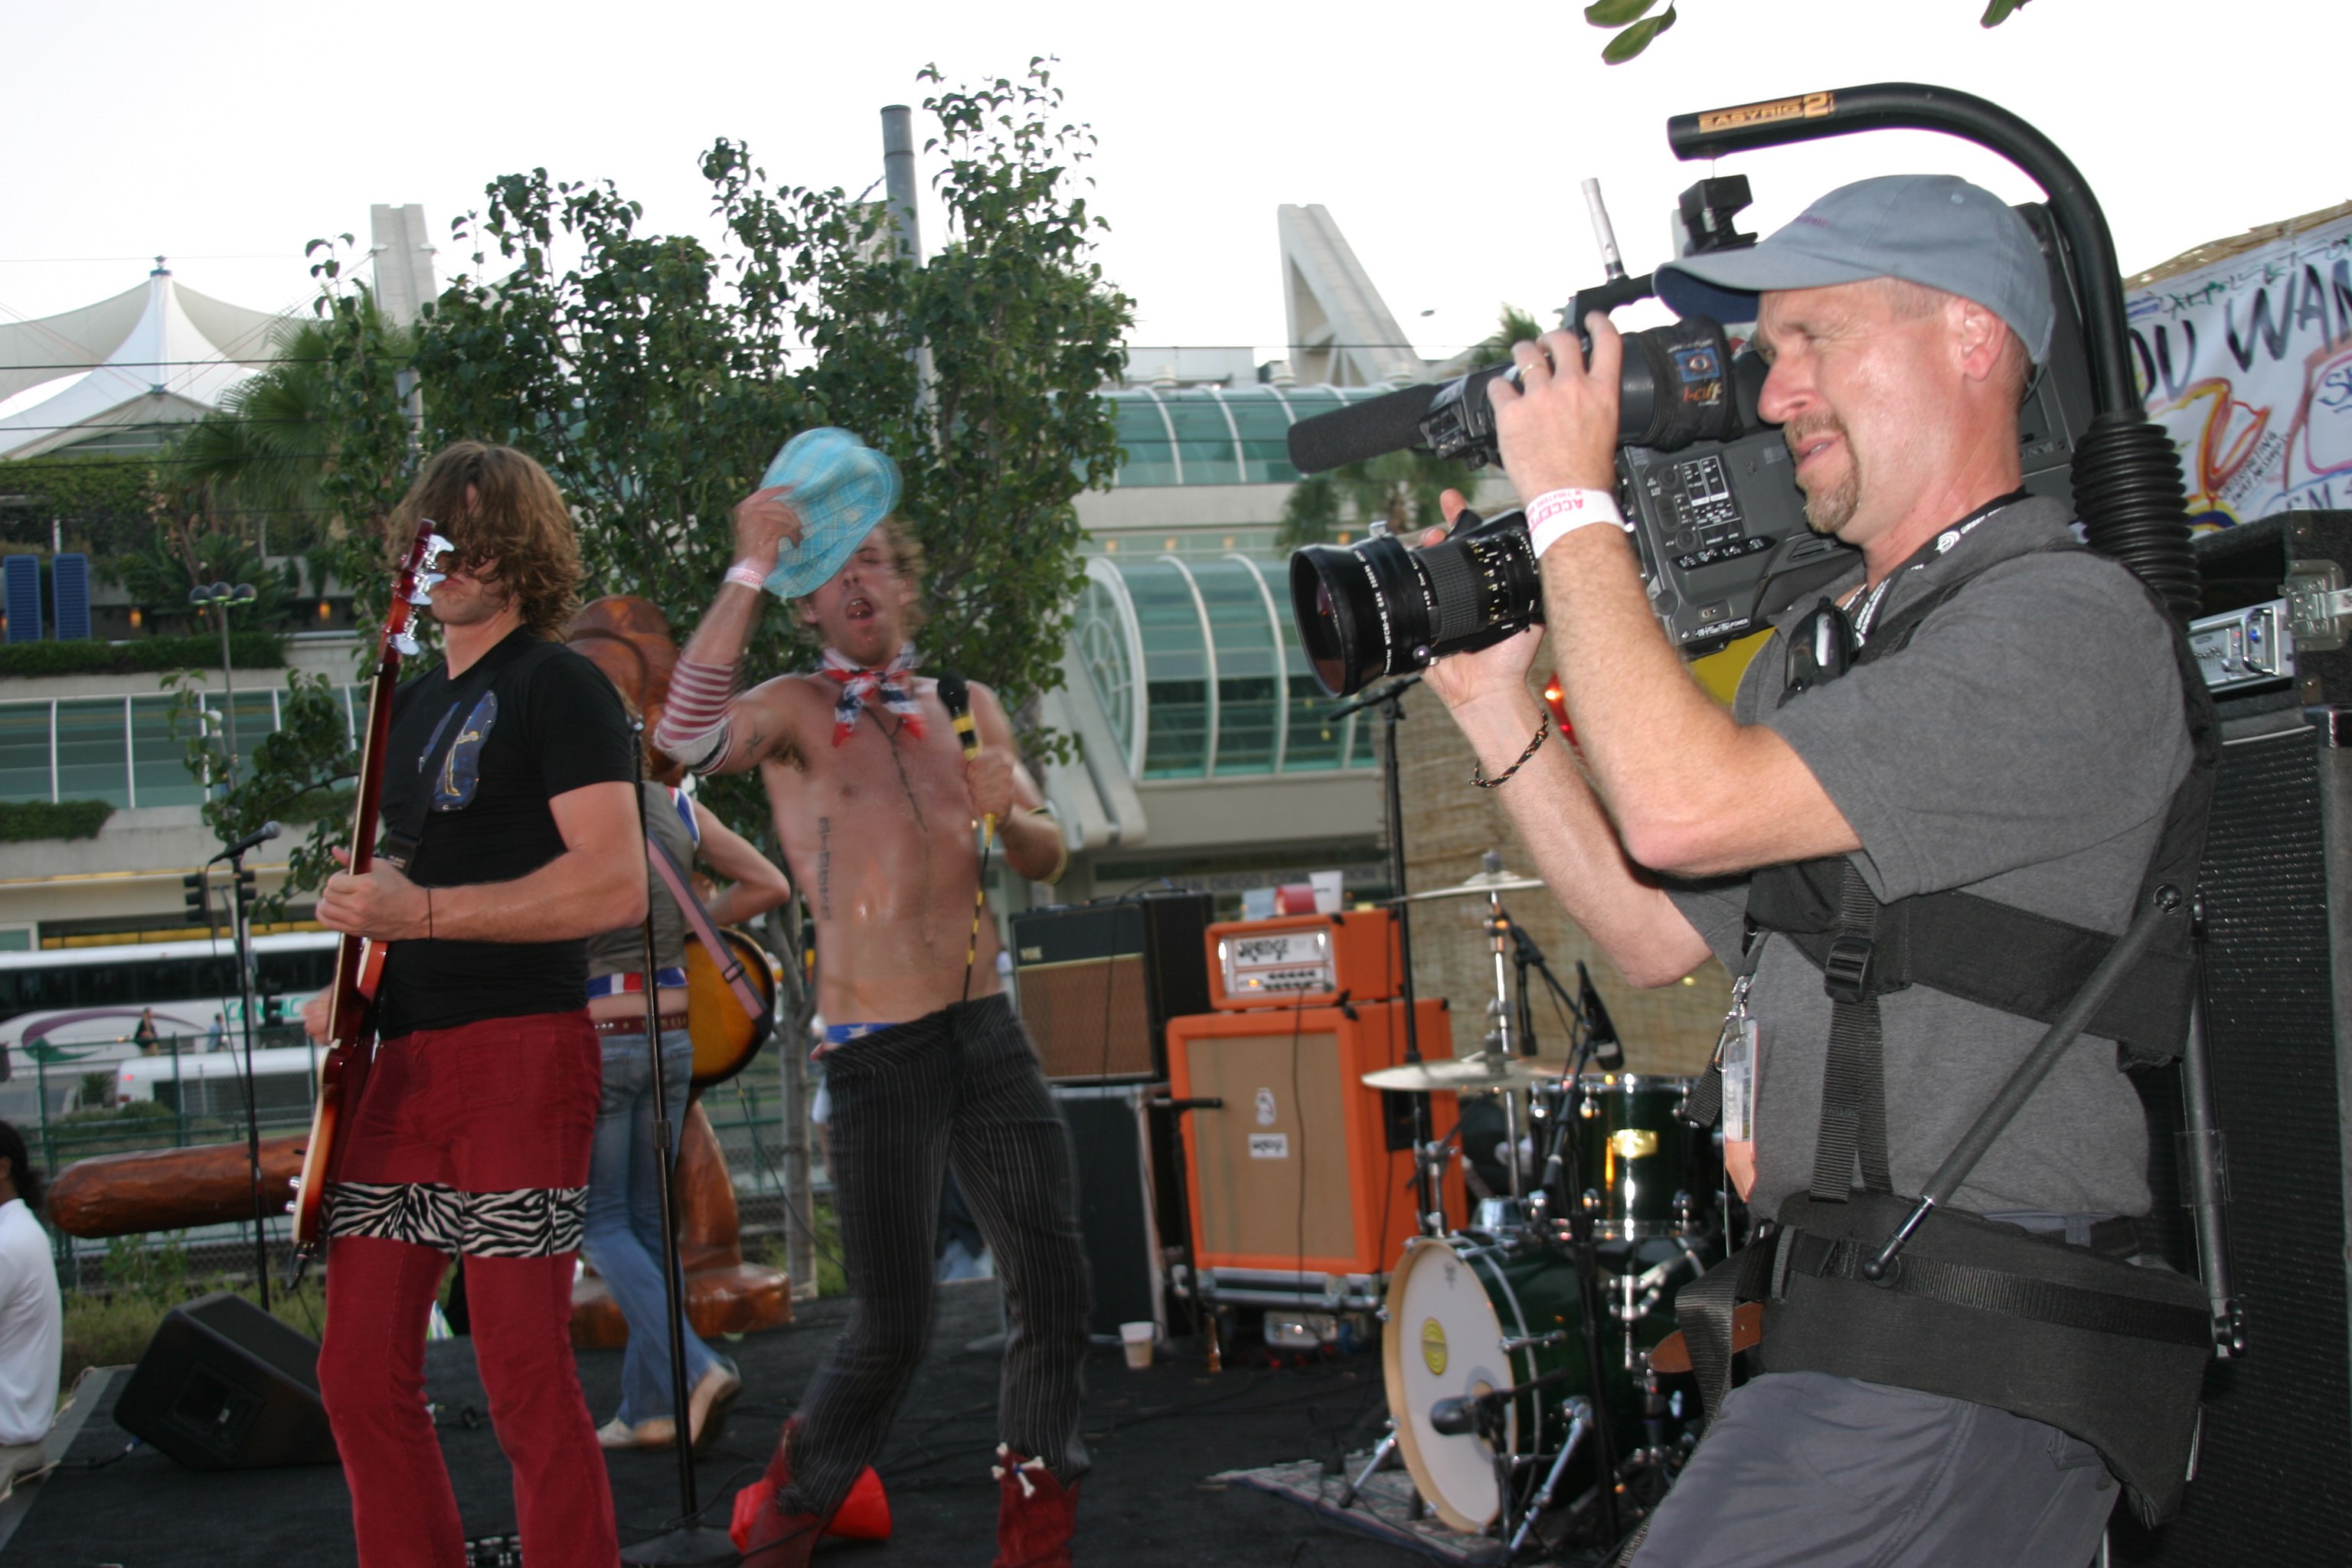 Joe Hursley and Ringers at San Diego Comic Con videotaped by DP Mark Schulze